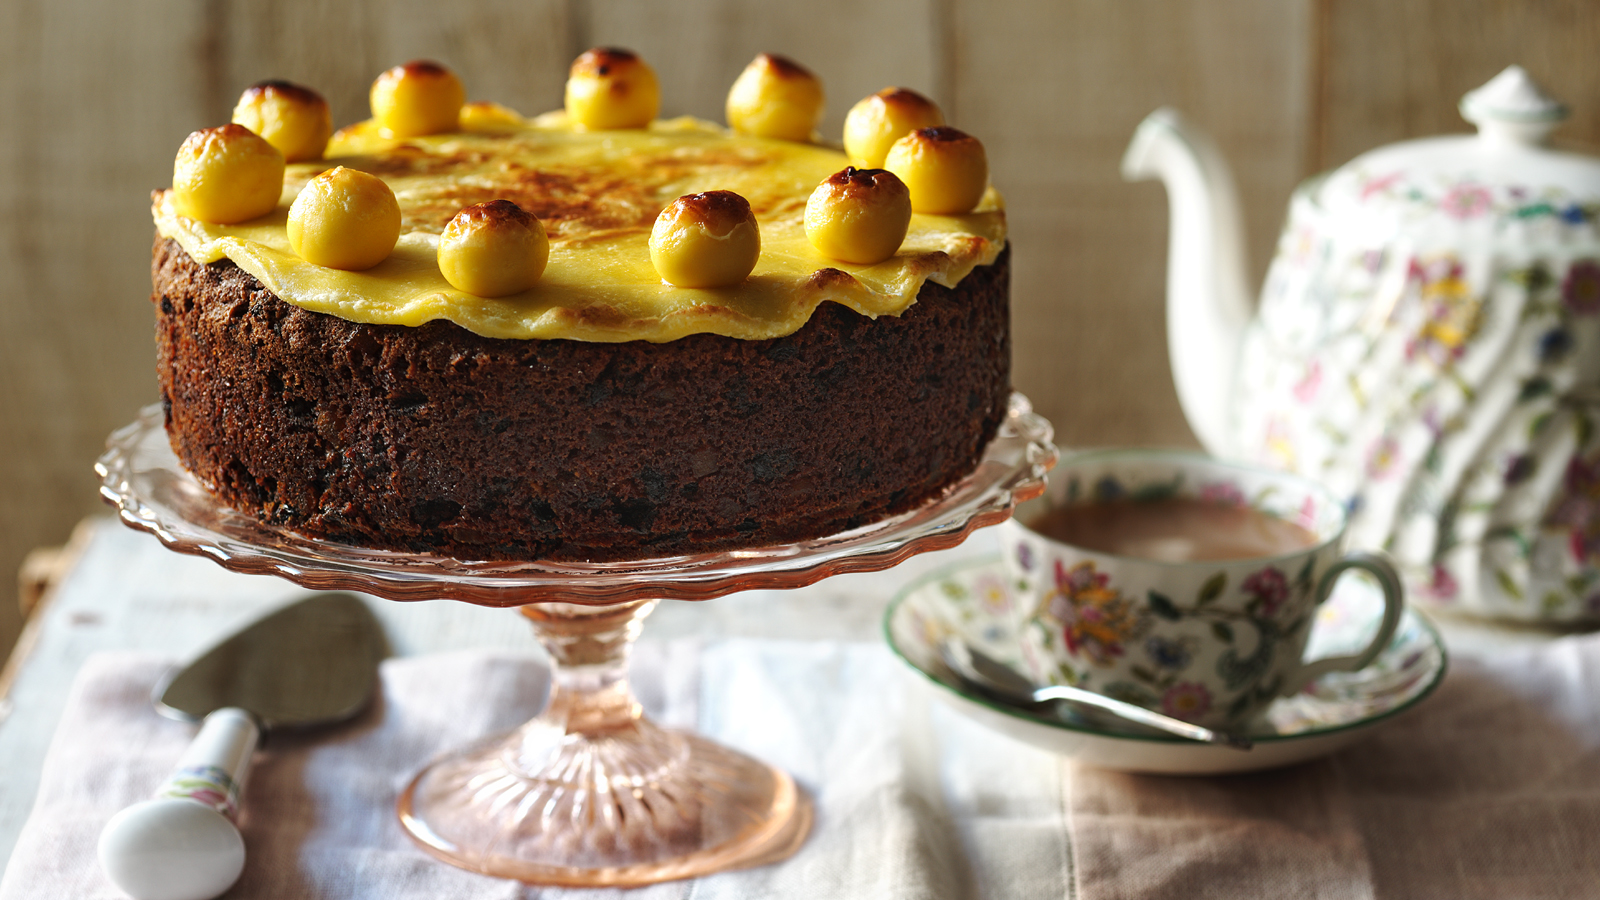 Tropical Easter Simnel cake recipe with Guinness (or rum) and why are there  eleven balls? | lili's cakes